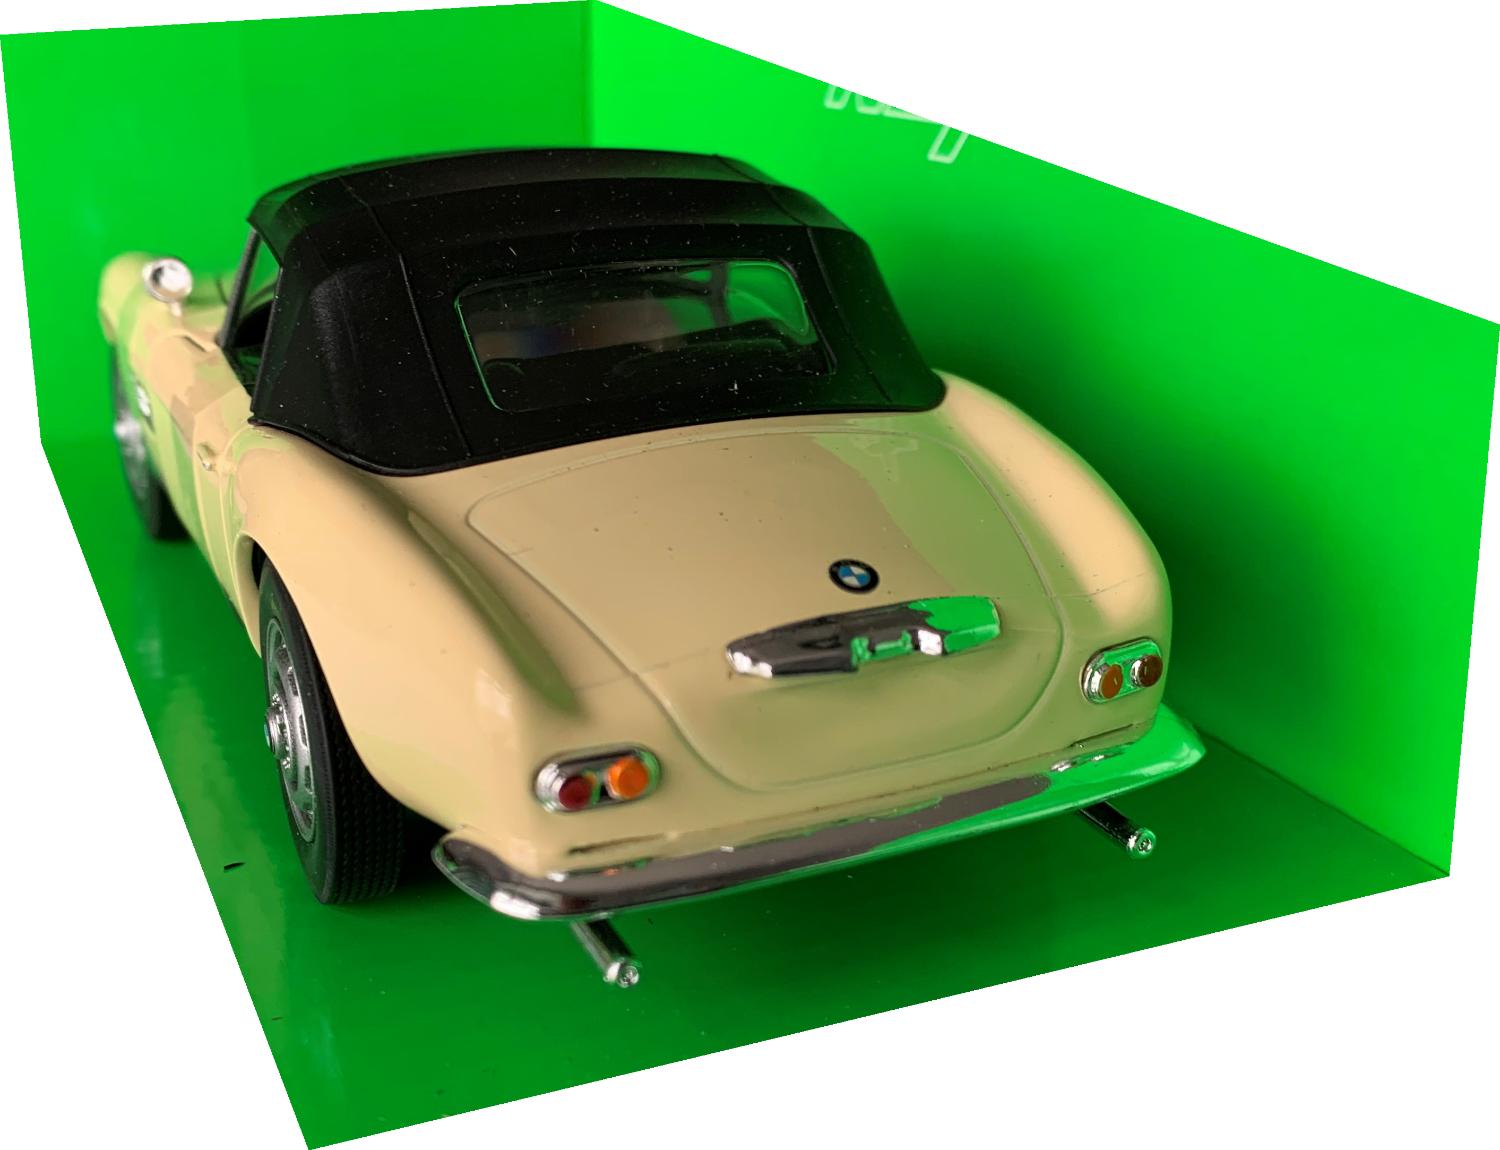 n excellent scale model of a BMW 507 Closed decorated in beige with silver wheels. Other trims are finished in chrome and silver. Features include opening driver and passenger doors, opening bonnet to reveal engine and working wheels